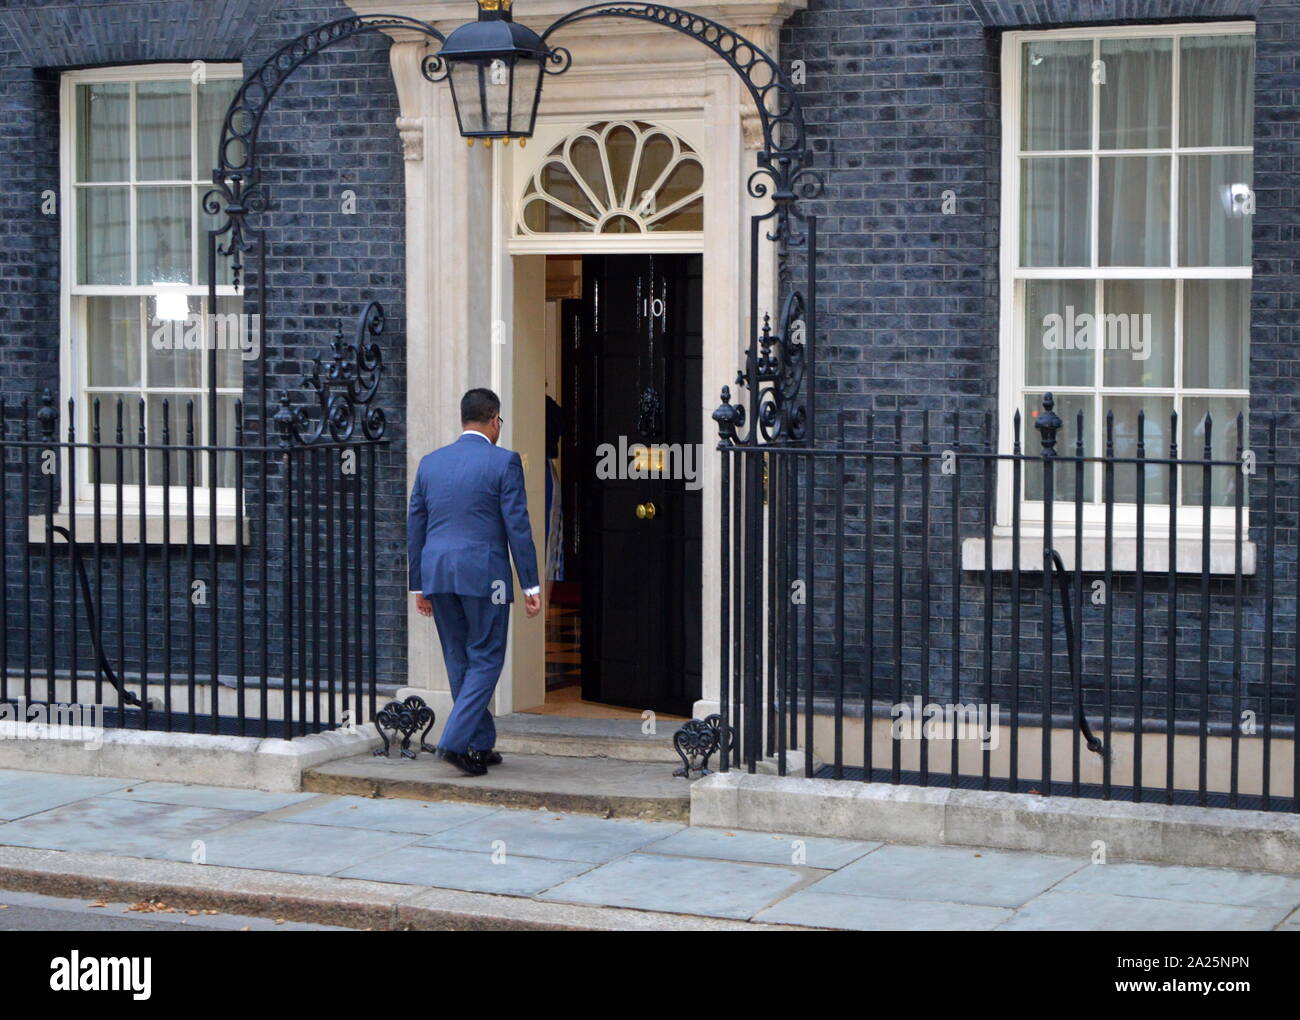 Alok sharma; british conservative party politician, arrives at number 10 downing street to be appointed as secretary of state for international development under boris johnson. Stock Photo